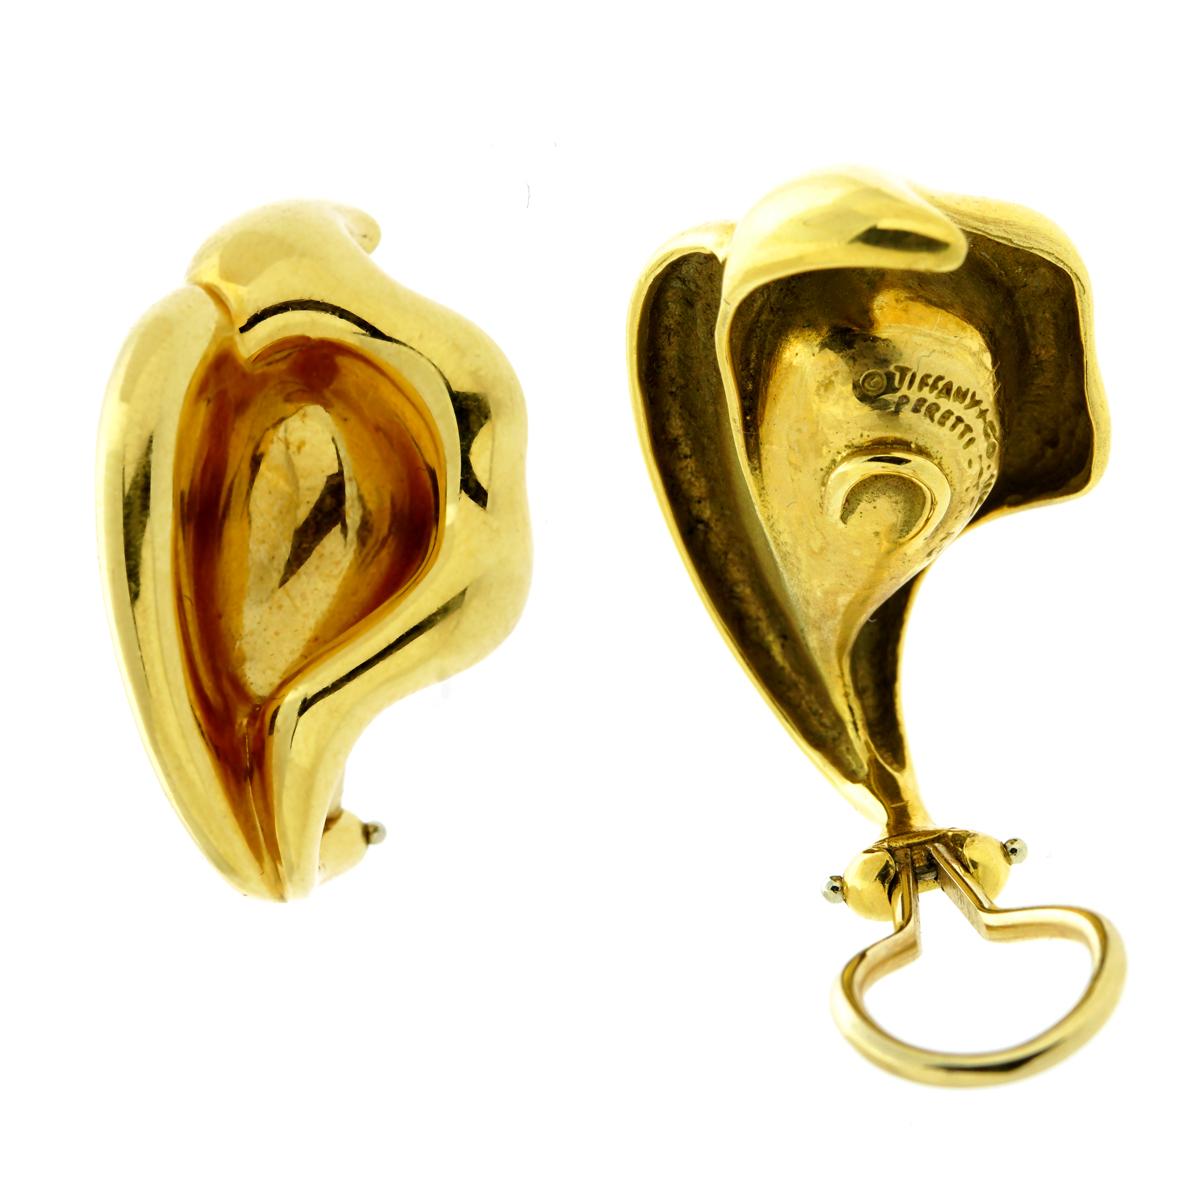 Tiffany & Co. Calla Lily Gold Earrings In Excellent Condition For Sale In Feasterville, PA